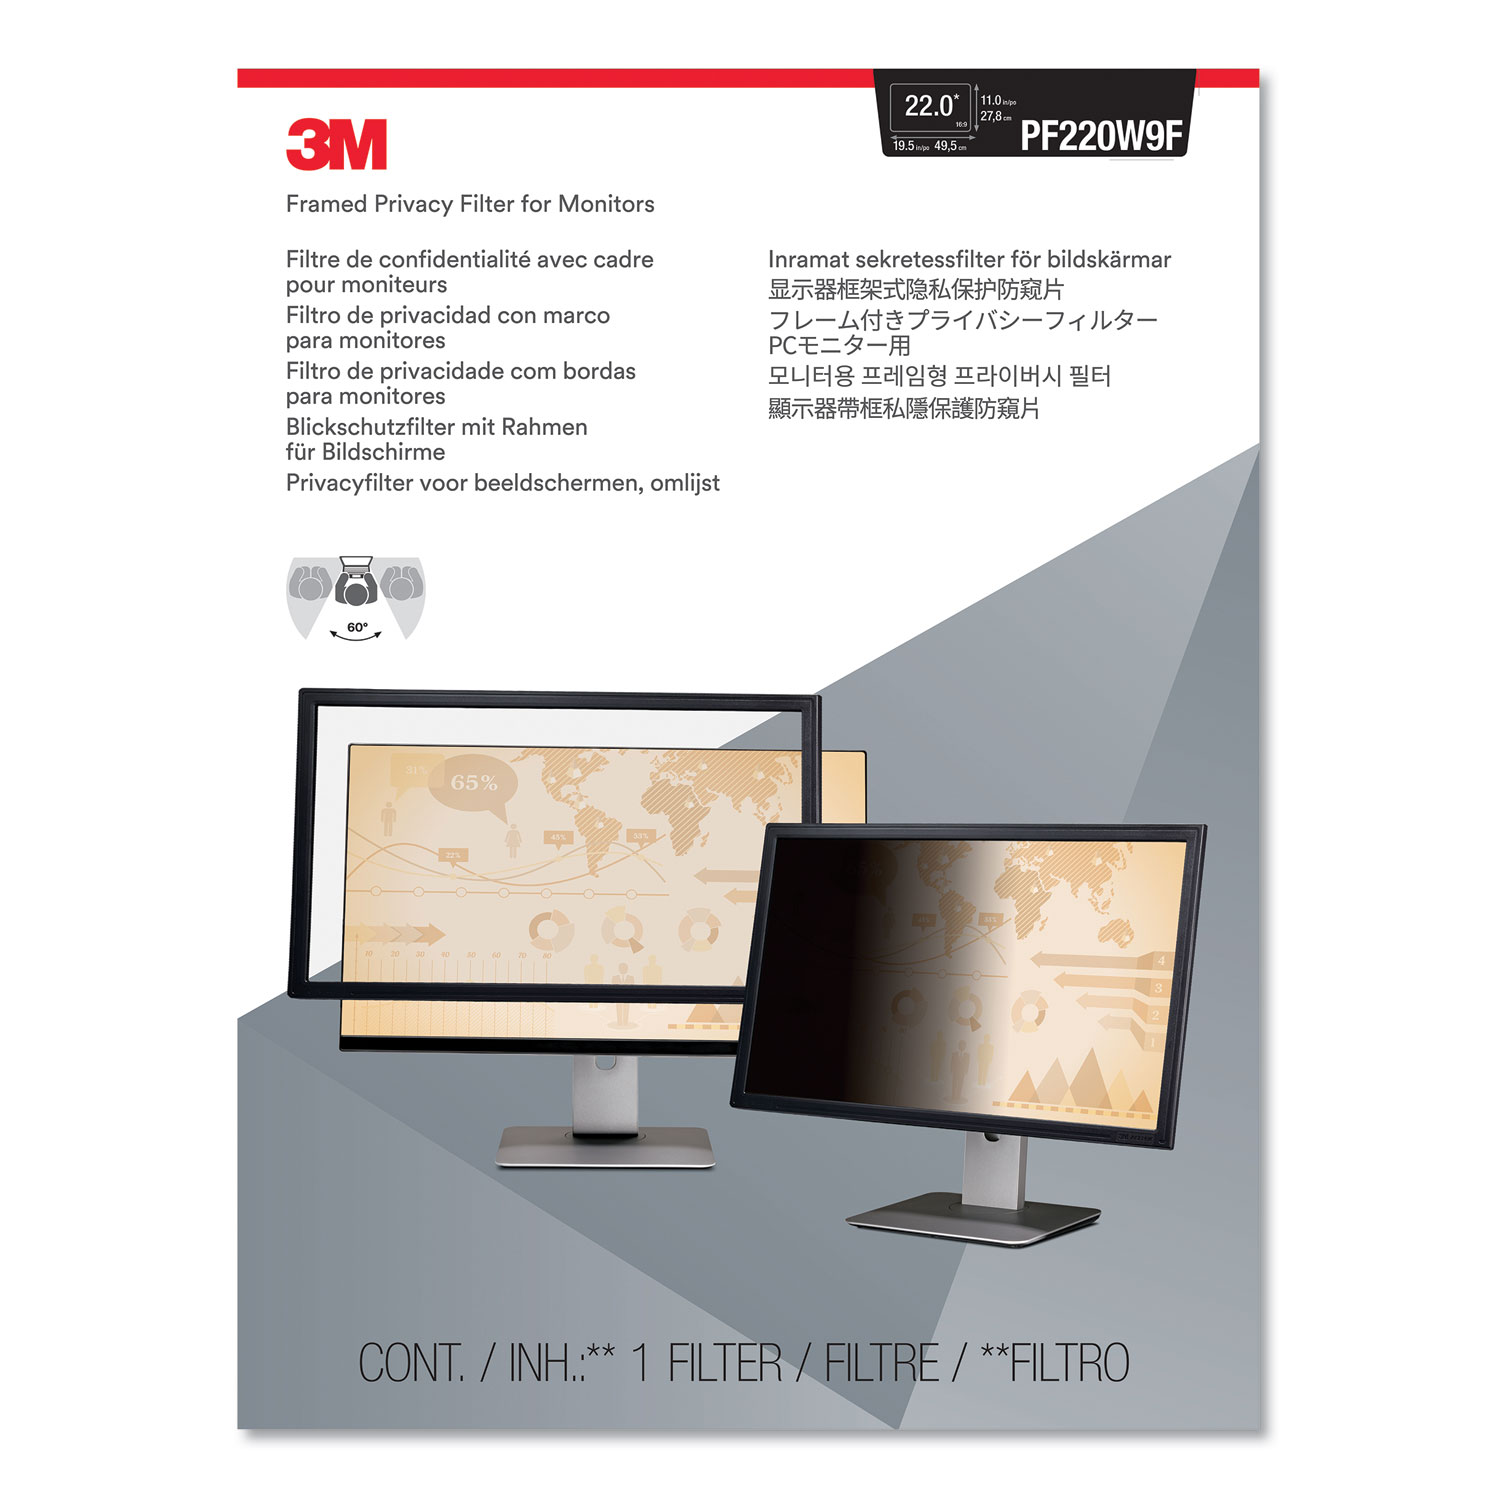 3M PF220W9F 16:10 Aspect Ratio Frameless Blackout Privacy Filter for 22 in. Monitors - image 2 of 3